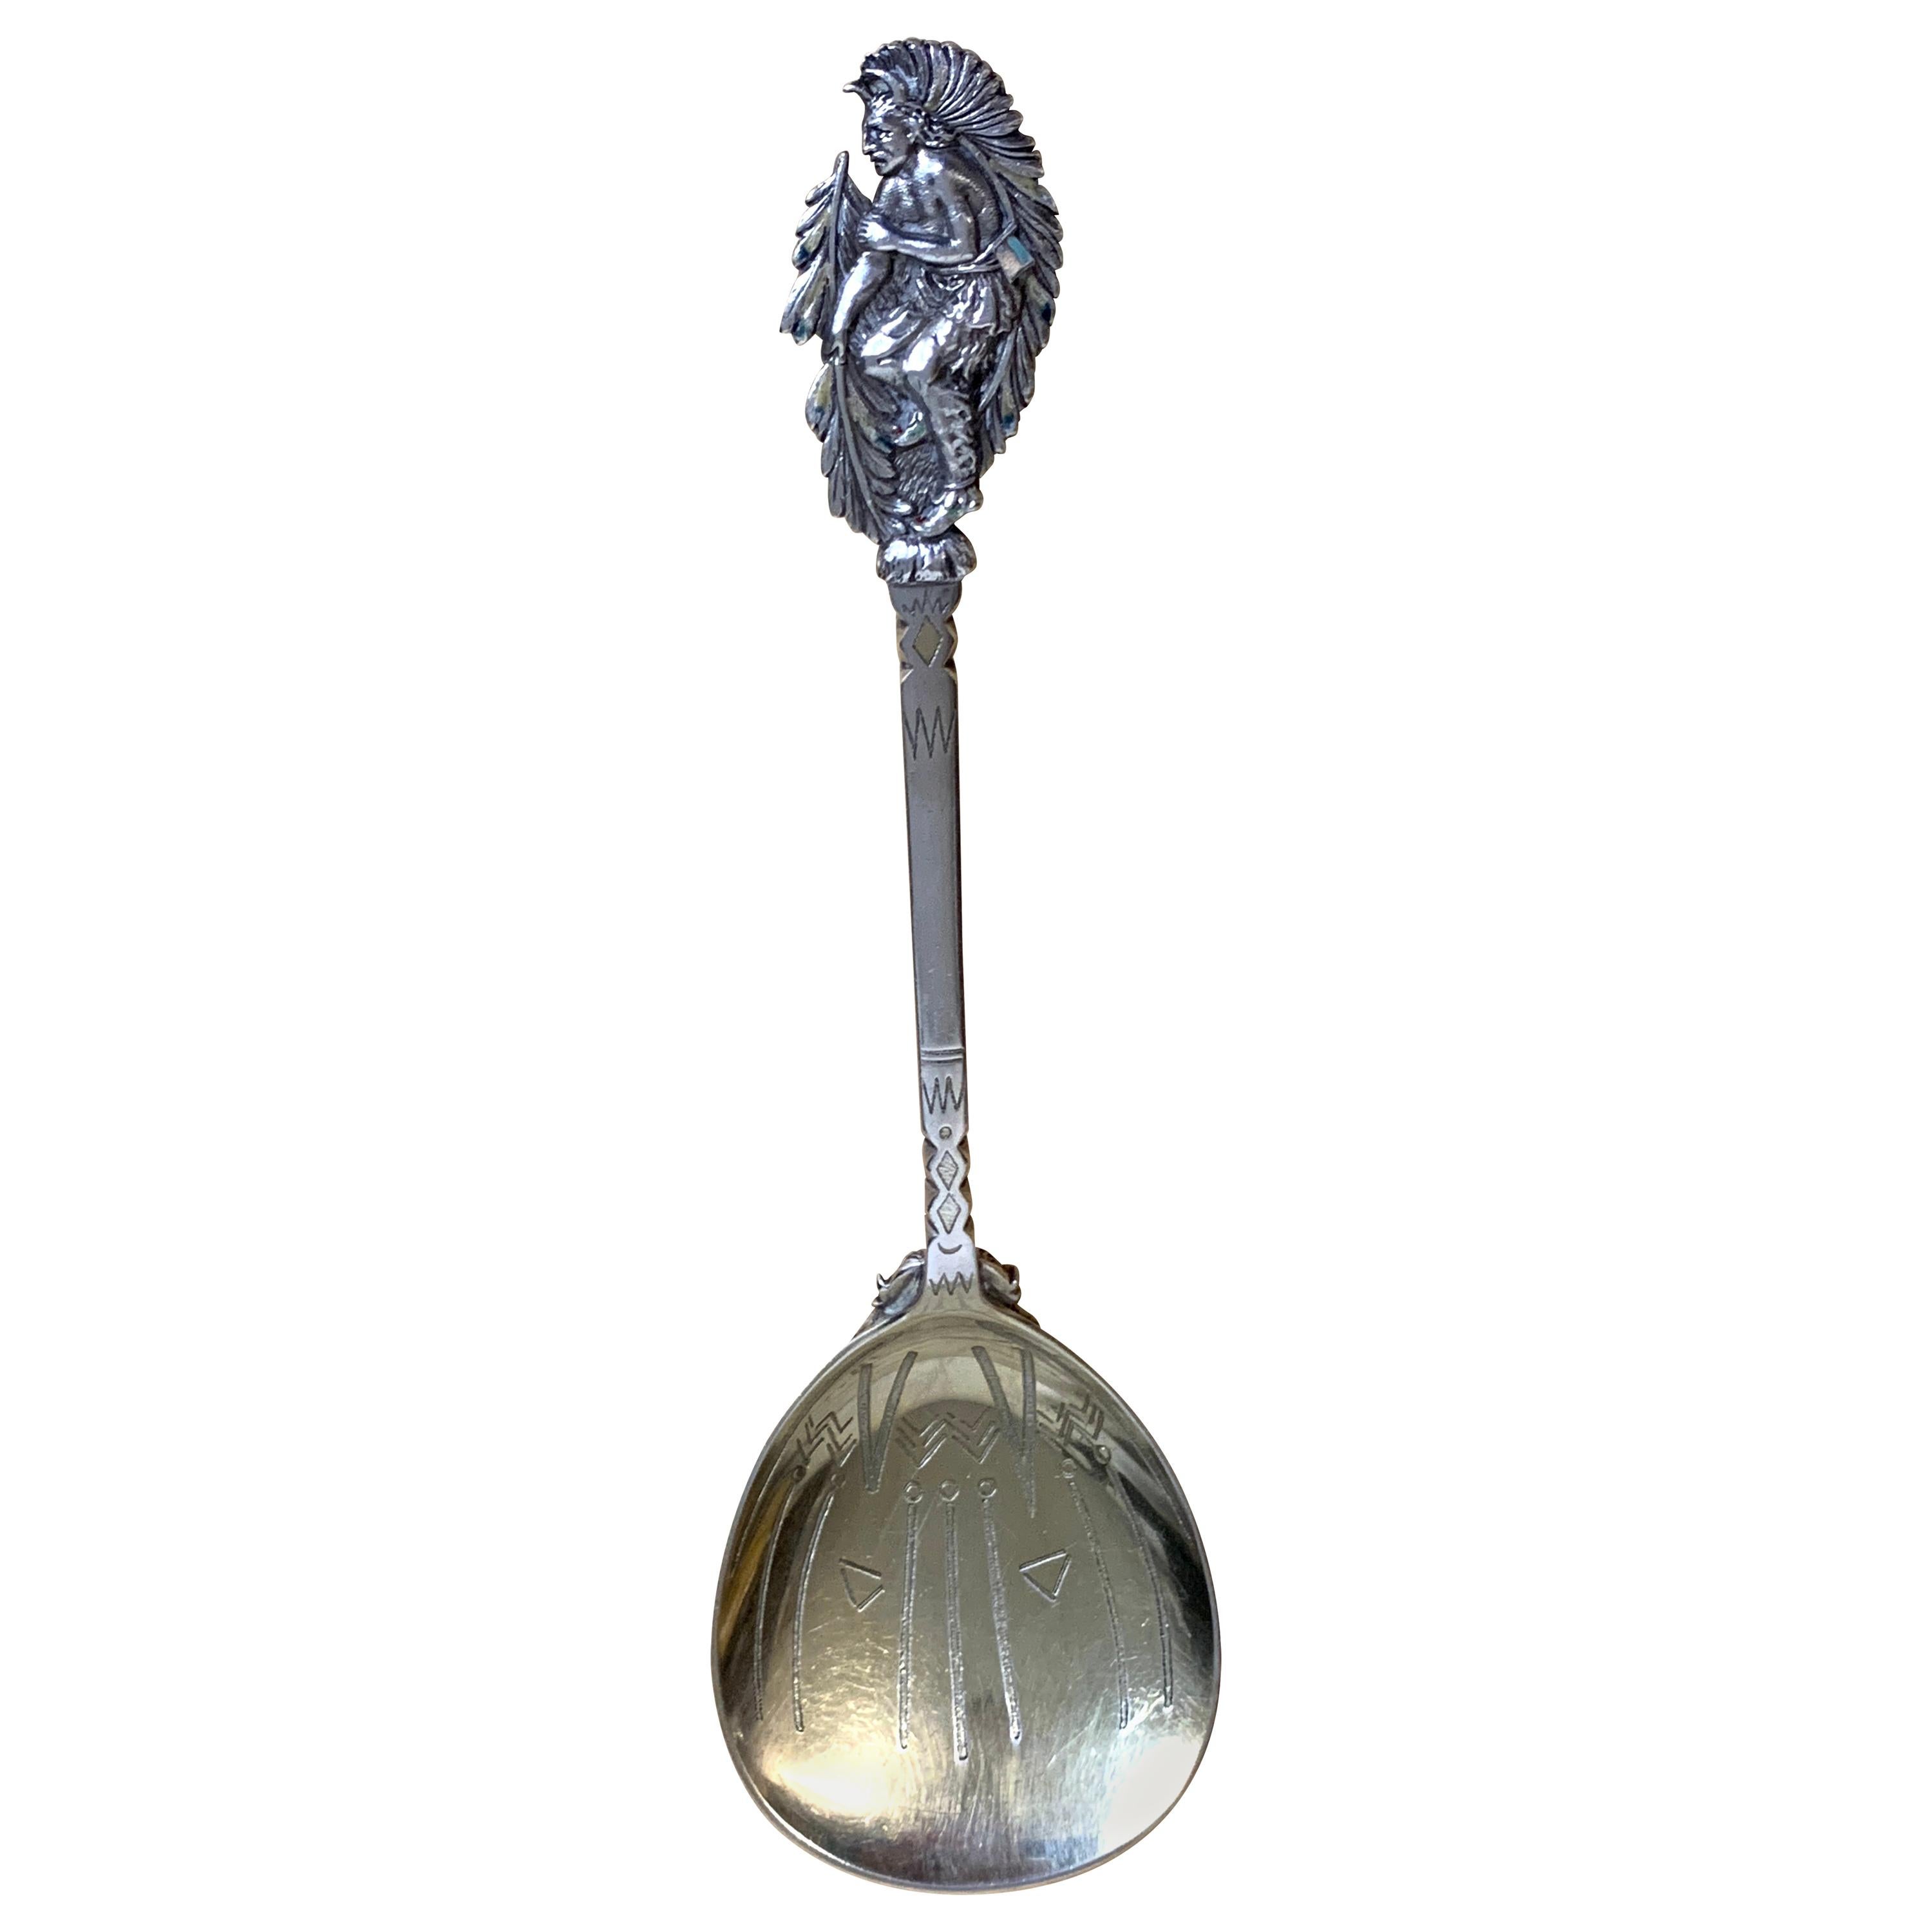 Tiffany & Co. 'Eagle Dance' Sterling and Enamel Serving Spoon, circa 1885